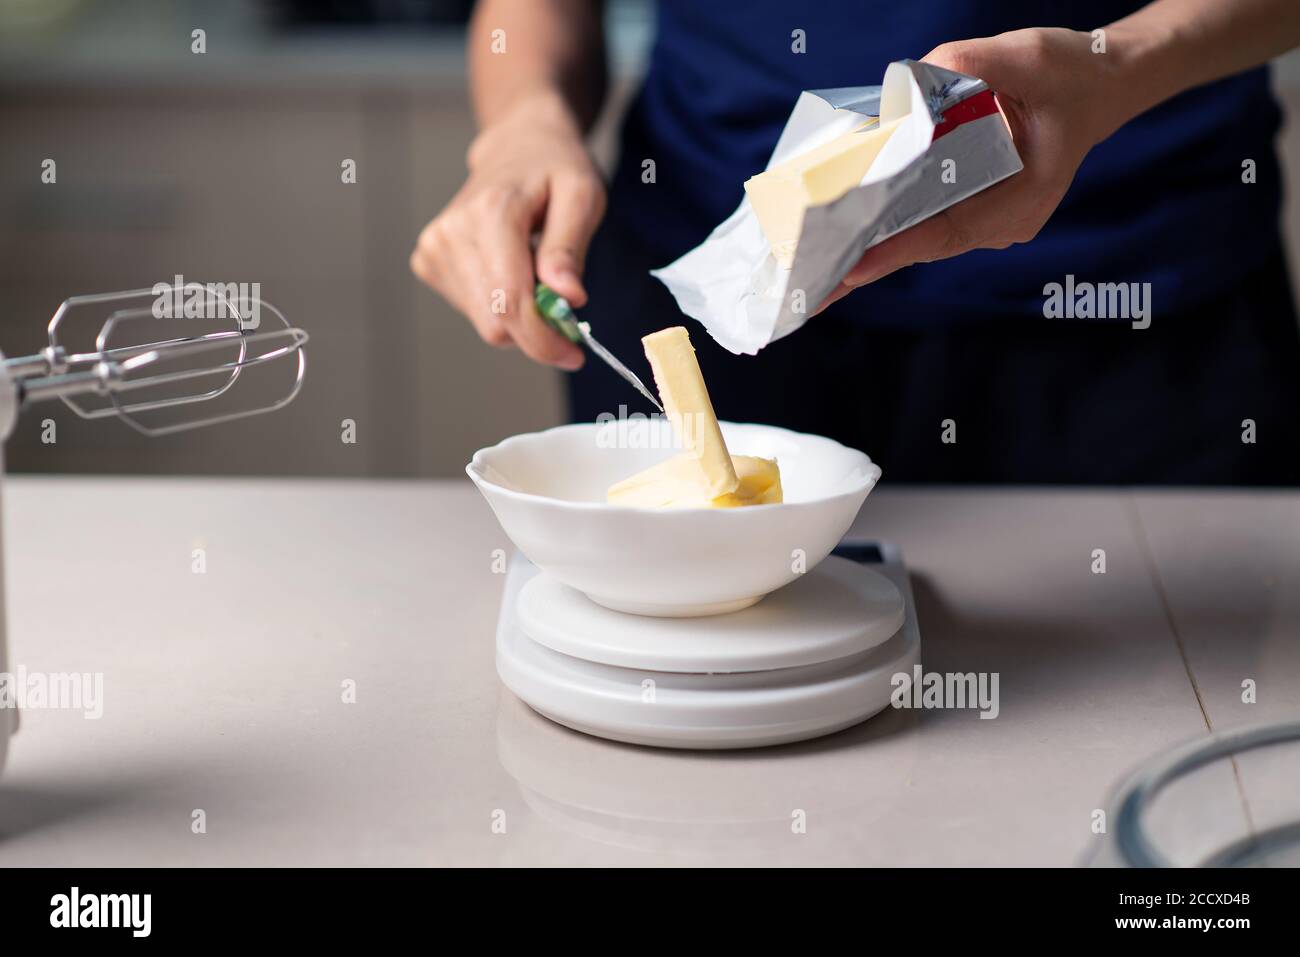 https://c8.alamy.com/comp/2CCXD4B/woman-measuring-butter-on-a-small-kitchen-scale-while-making-cookies-in-the-kitchen-at-home-closeup-2CCXD4B.jpg